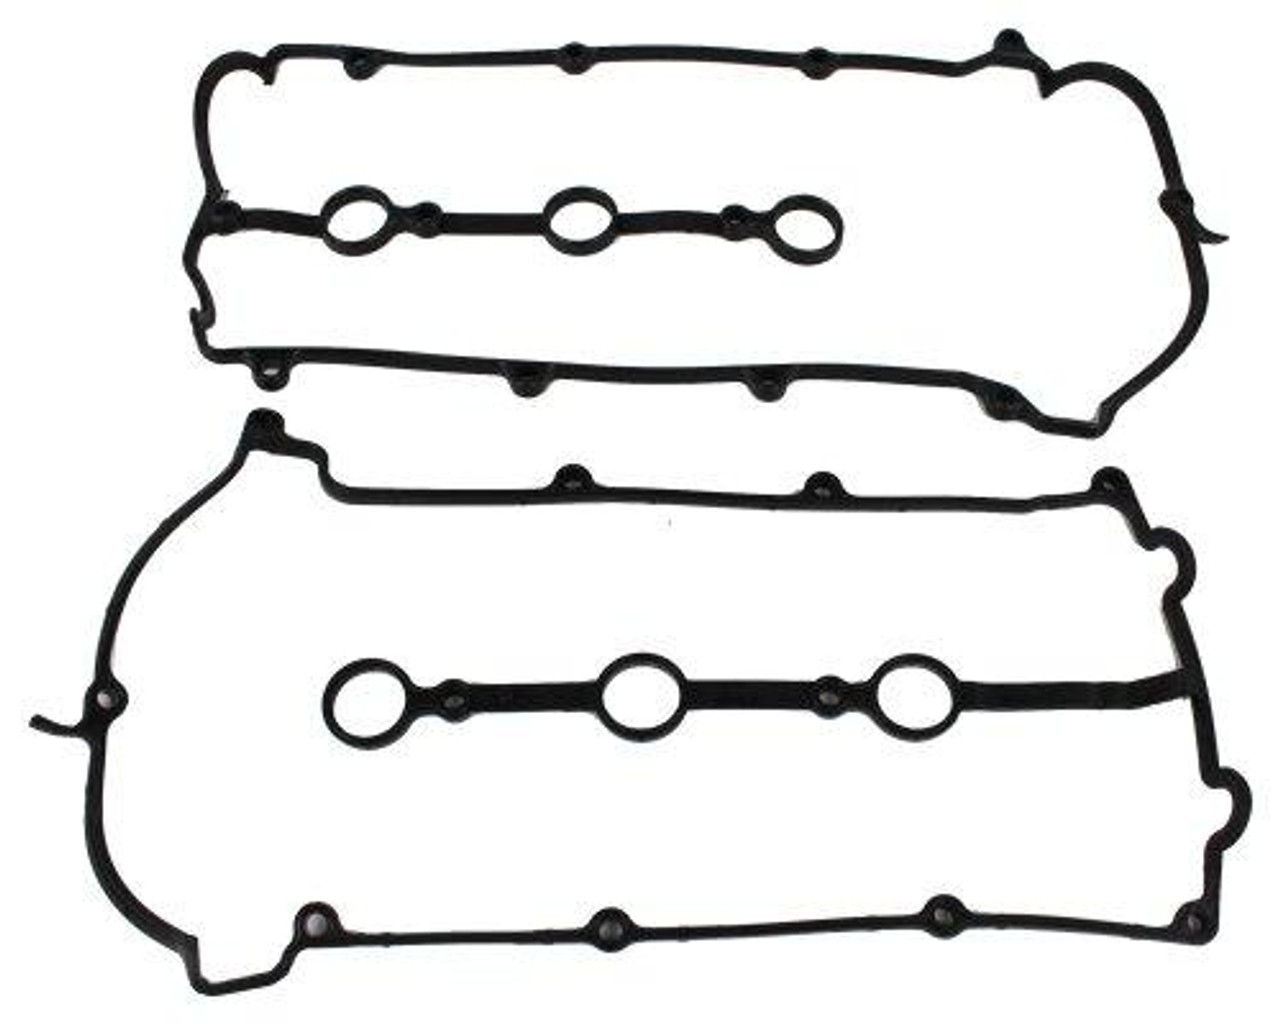 Valve Cover Gasket - 1995 Ford Probe 2.5L Engine Parts # VC455ZE3